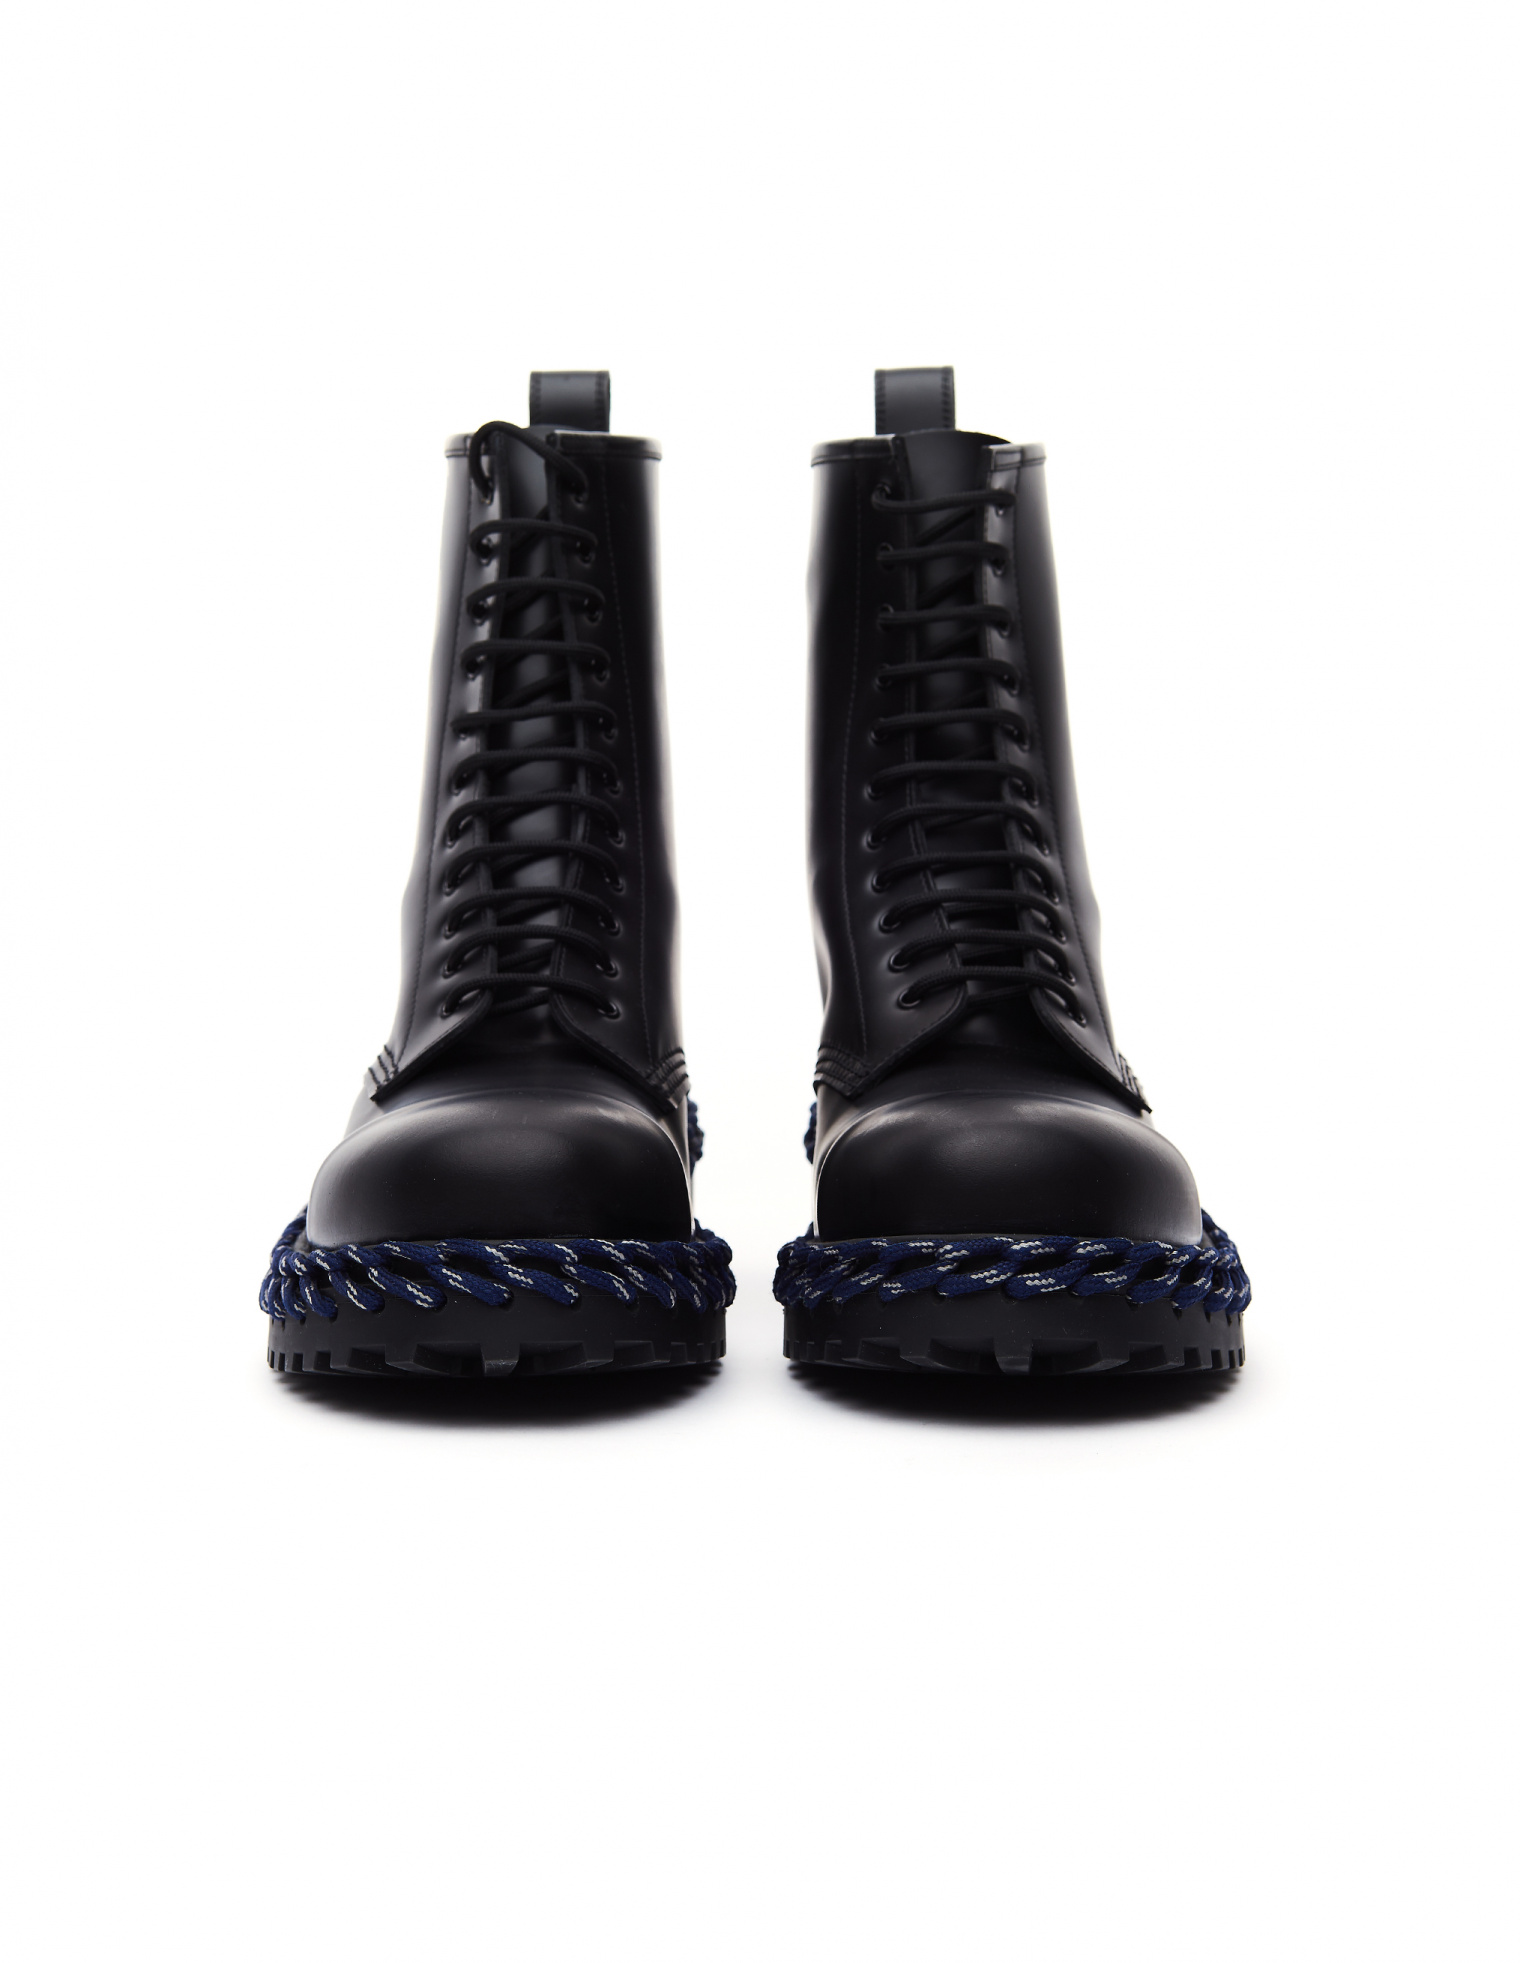 Buy Balenciaga women black calfskin boots with decorative laces for $1,290 SV77, 530244/1007